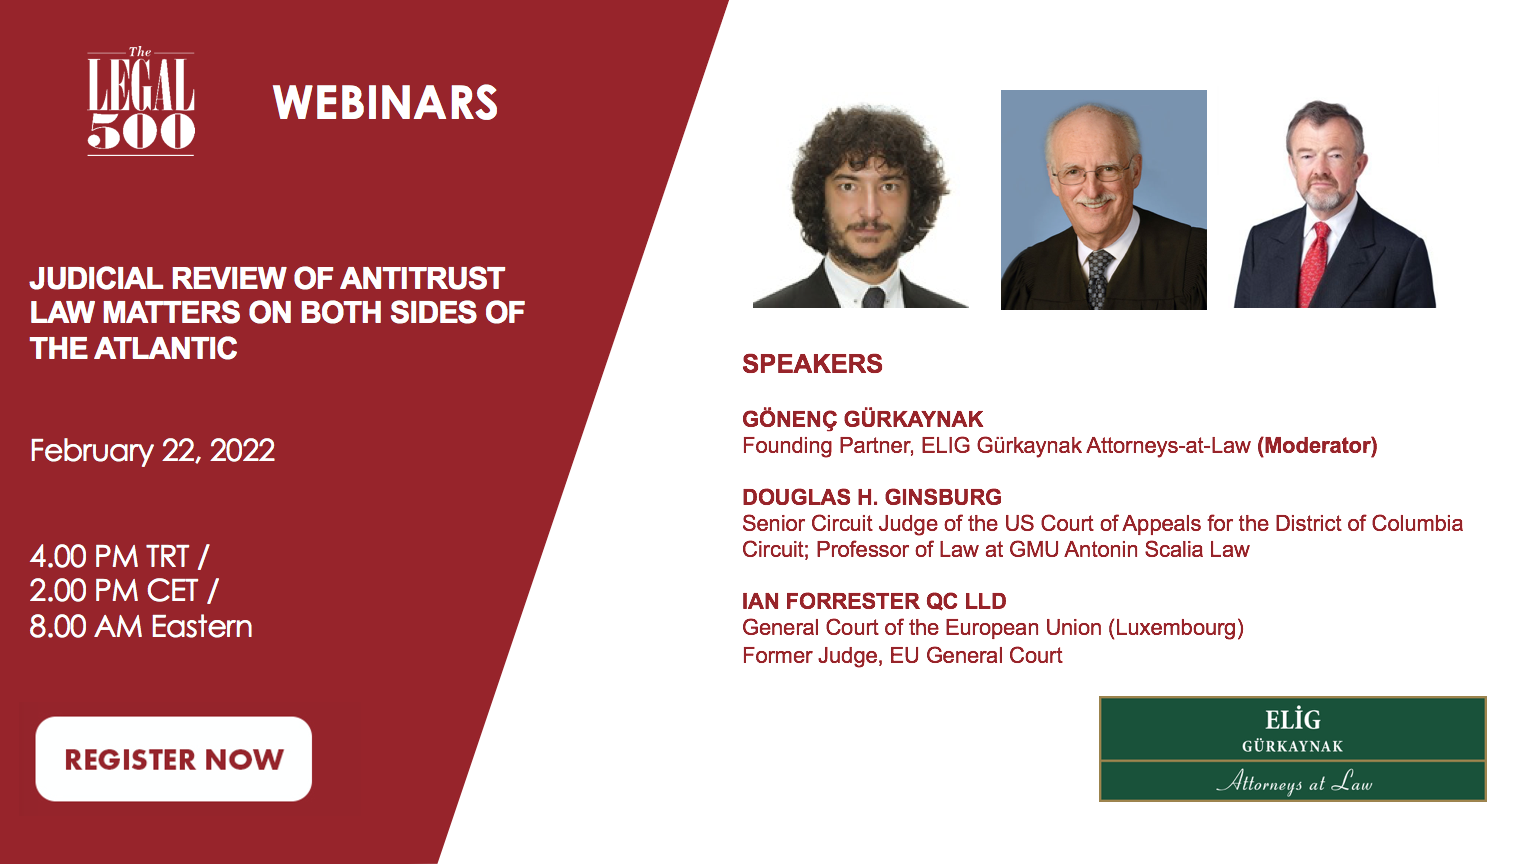 The Legal 500 Webinar “Judicial Review of Antitrust Law Matters At Both Sides of The Atlantic”